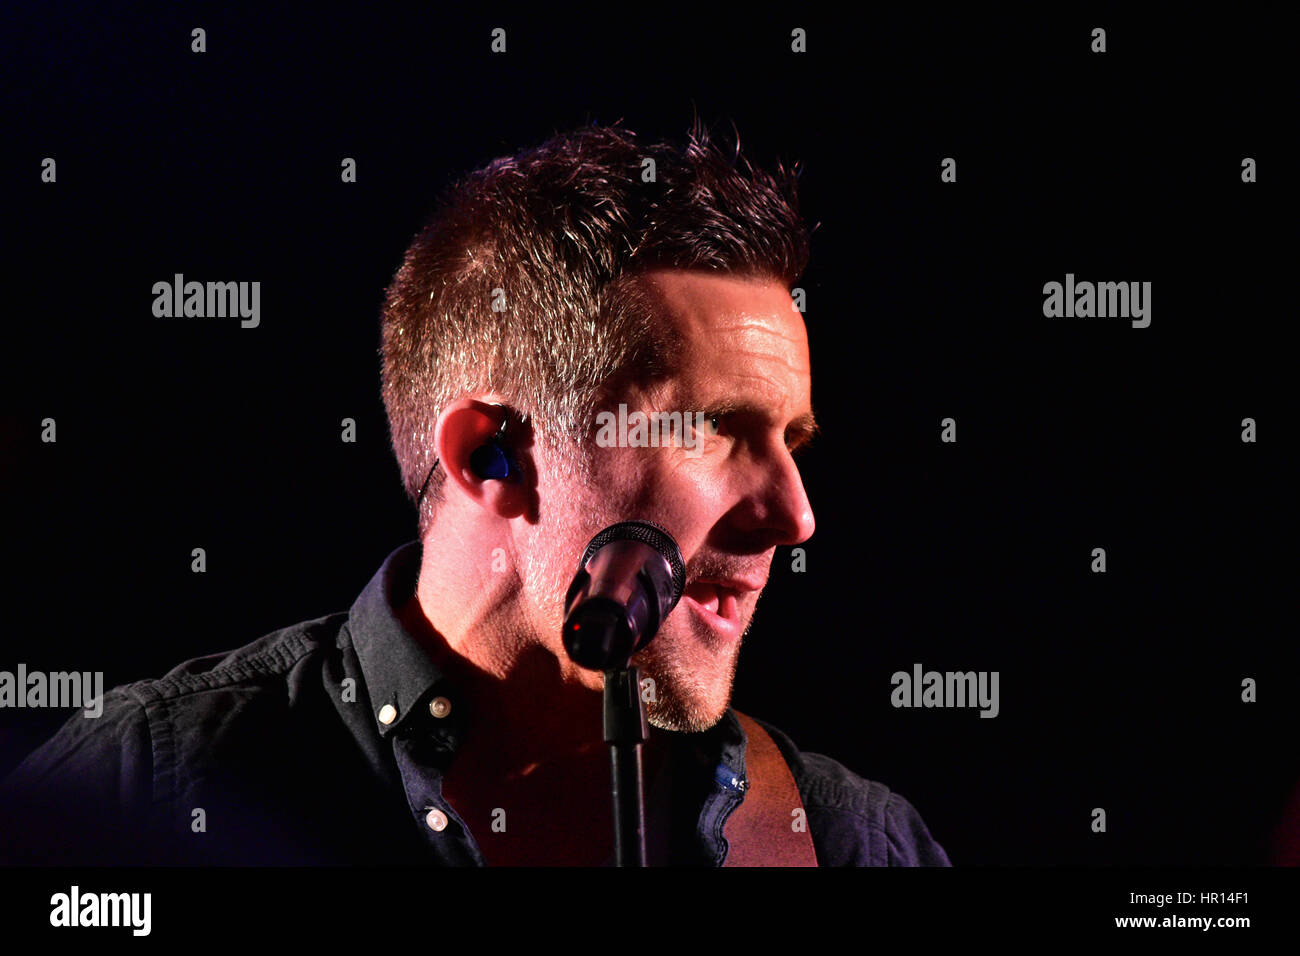 County Tyrone, Northern Ireland. 26th February 2017. Irish Country Music star Johnny Brady live on stage in County Tyrone. Credit: Mark Winter/Alamy Live News Stock Photo